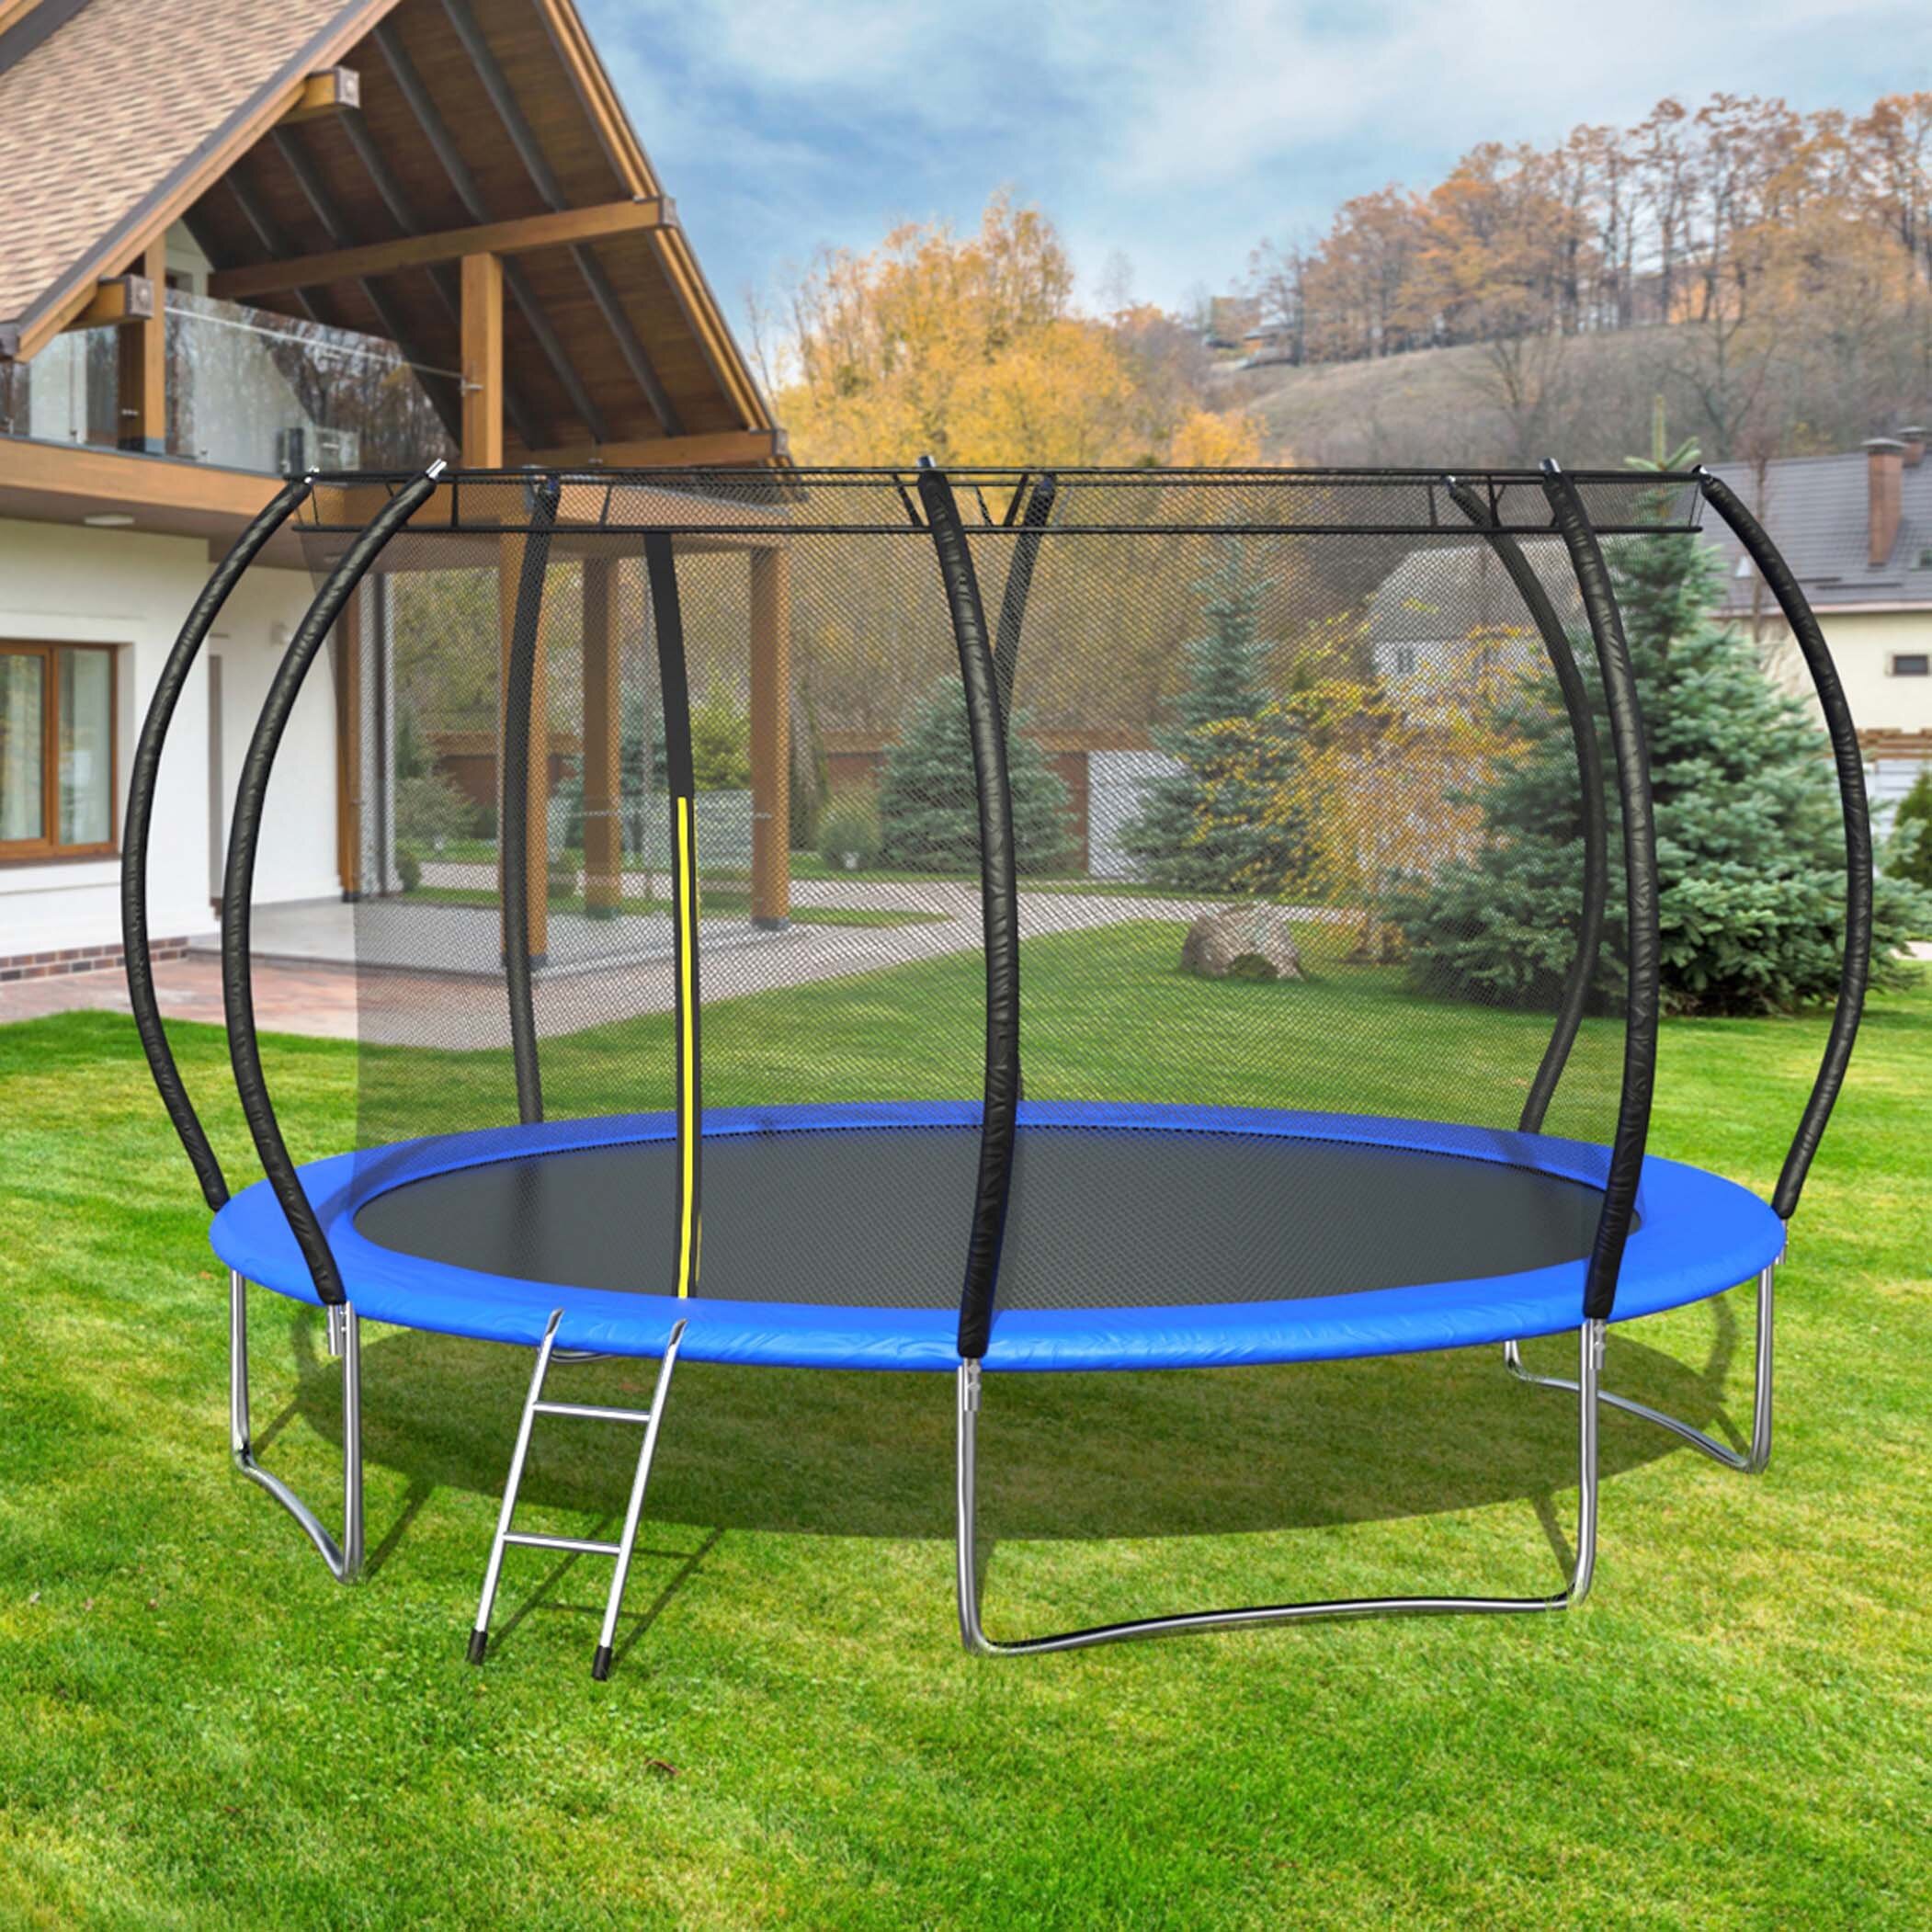 with Safety Enclosure Net Trampoline for Kids and Adult,14 FT Outdoor Trampoline Jump Recreational Trampolines Trampoline Spring Pad,Waterproof Jump Mat & Ladder 